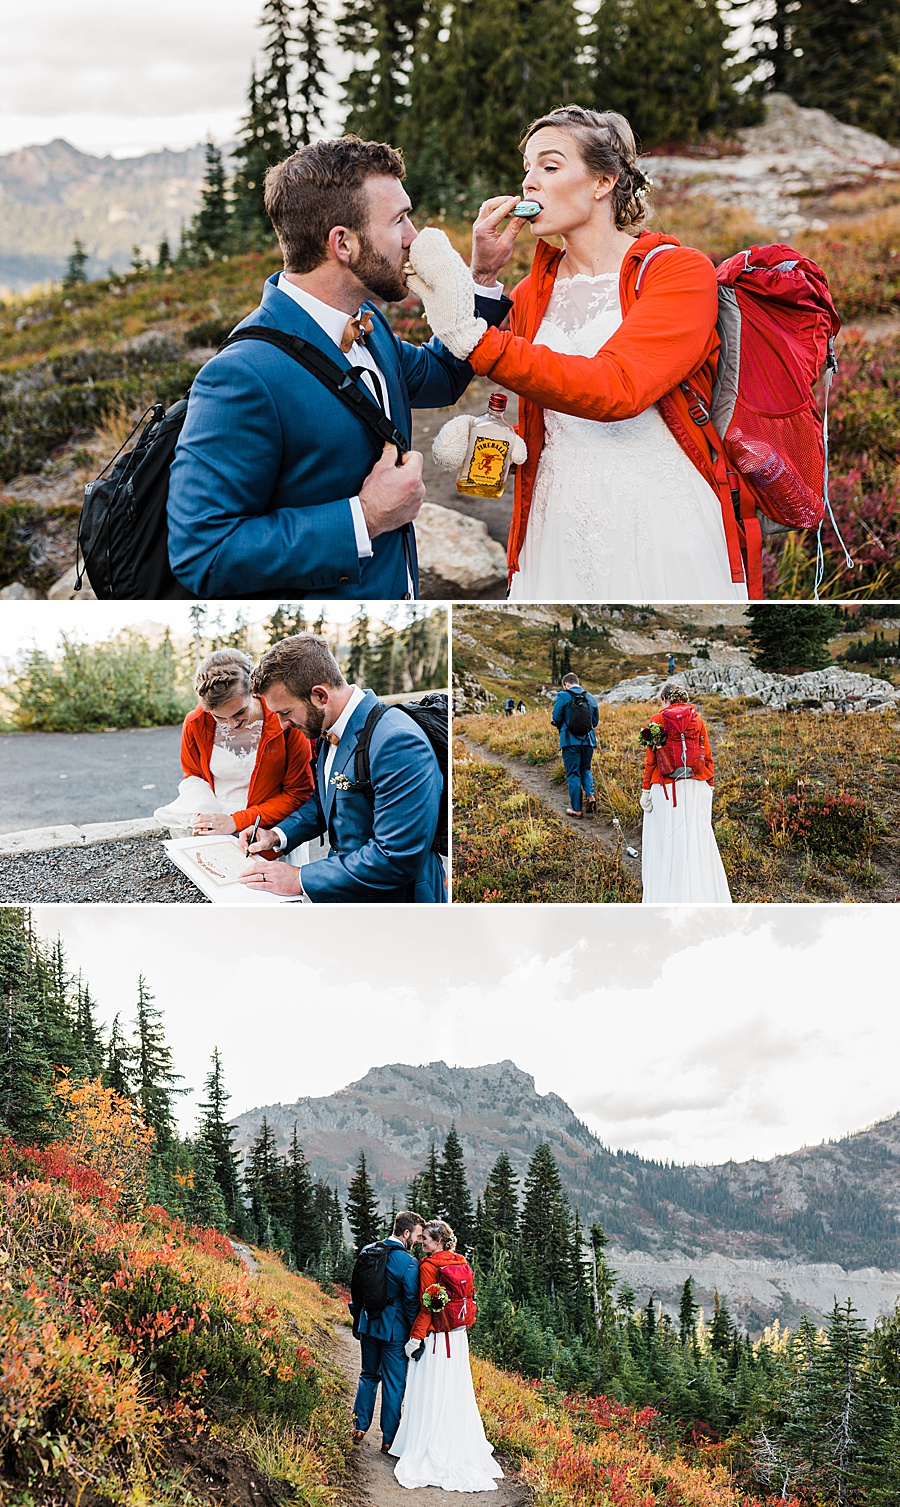 A bride and groom celebrate and walk down the trail after their beautiful backcountry wedding ceremony off of the PCT in Washington